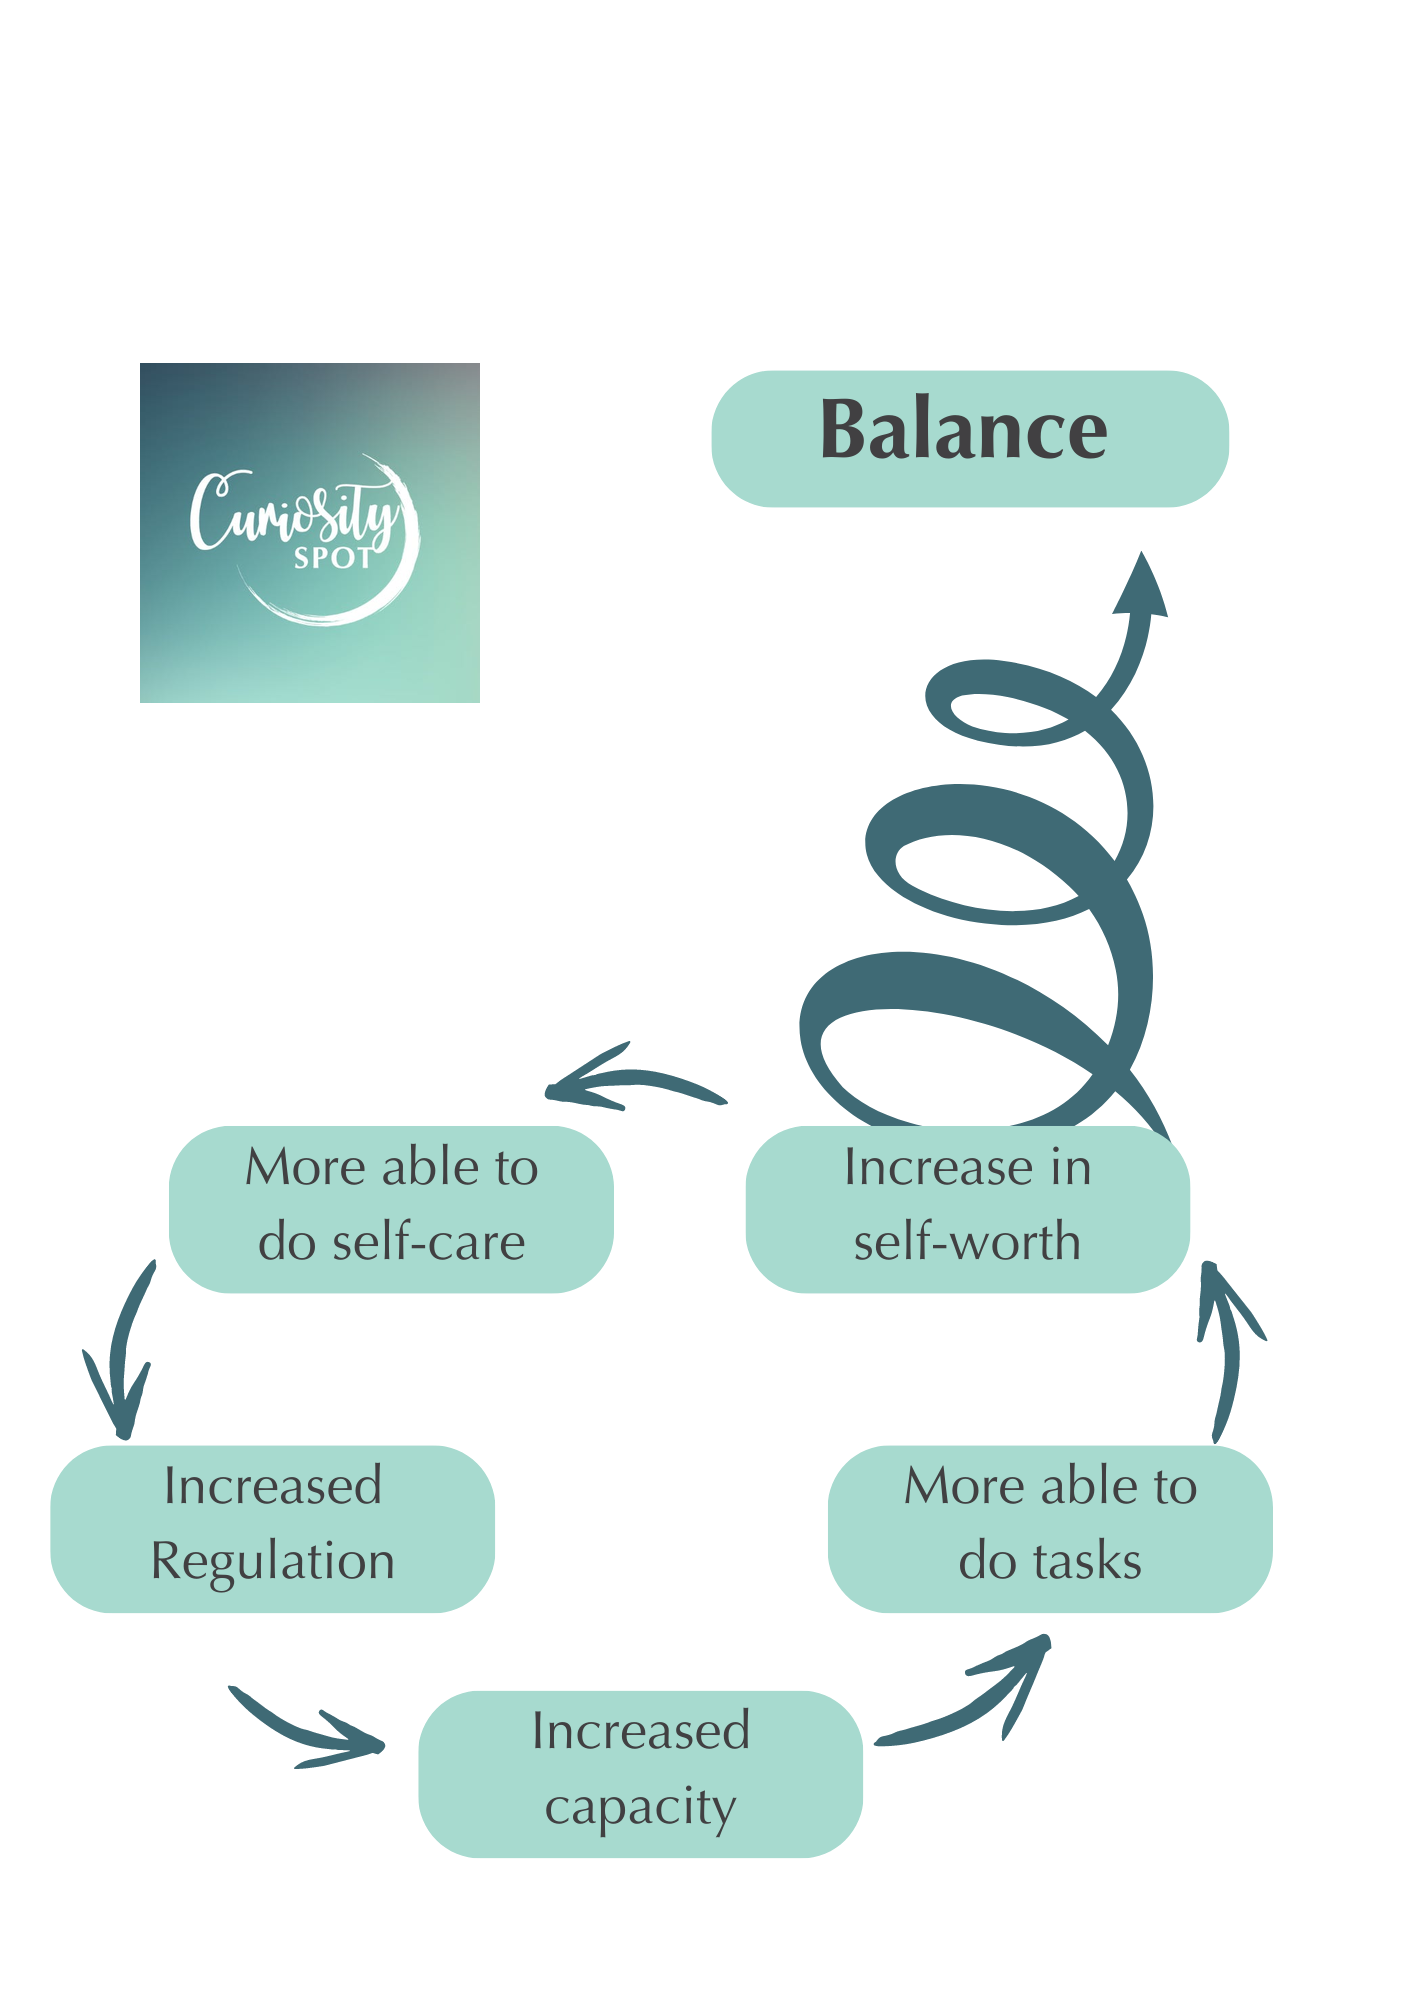 More able to do self-care to  increased regulation to increased capacity to more able to to tasks to increase in self-worth in an upeard spiral leading to balance